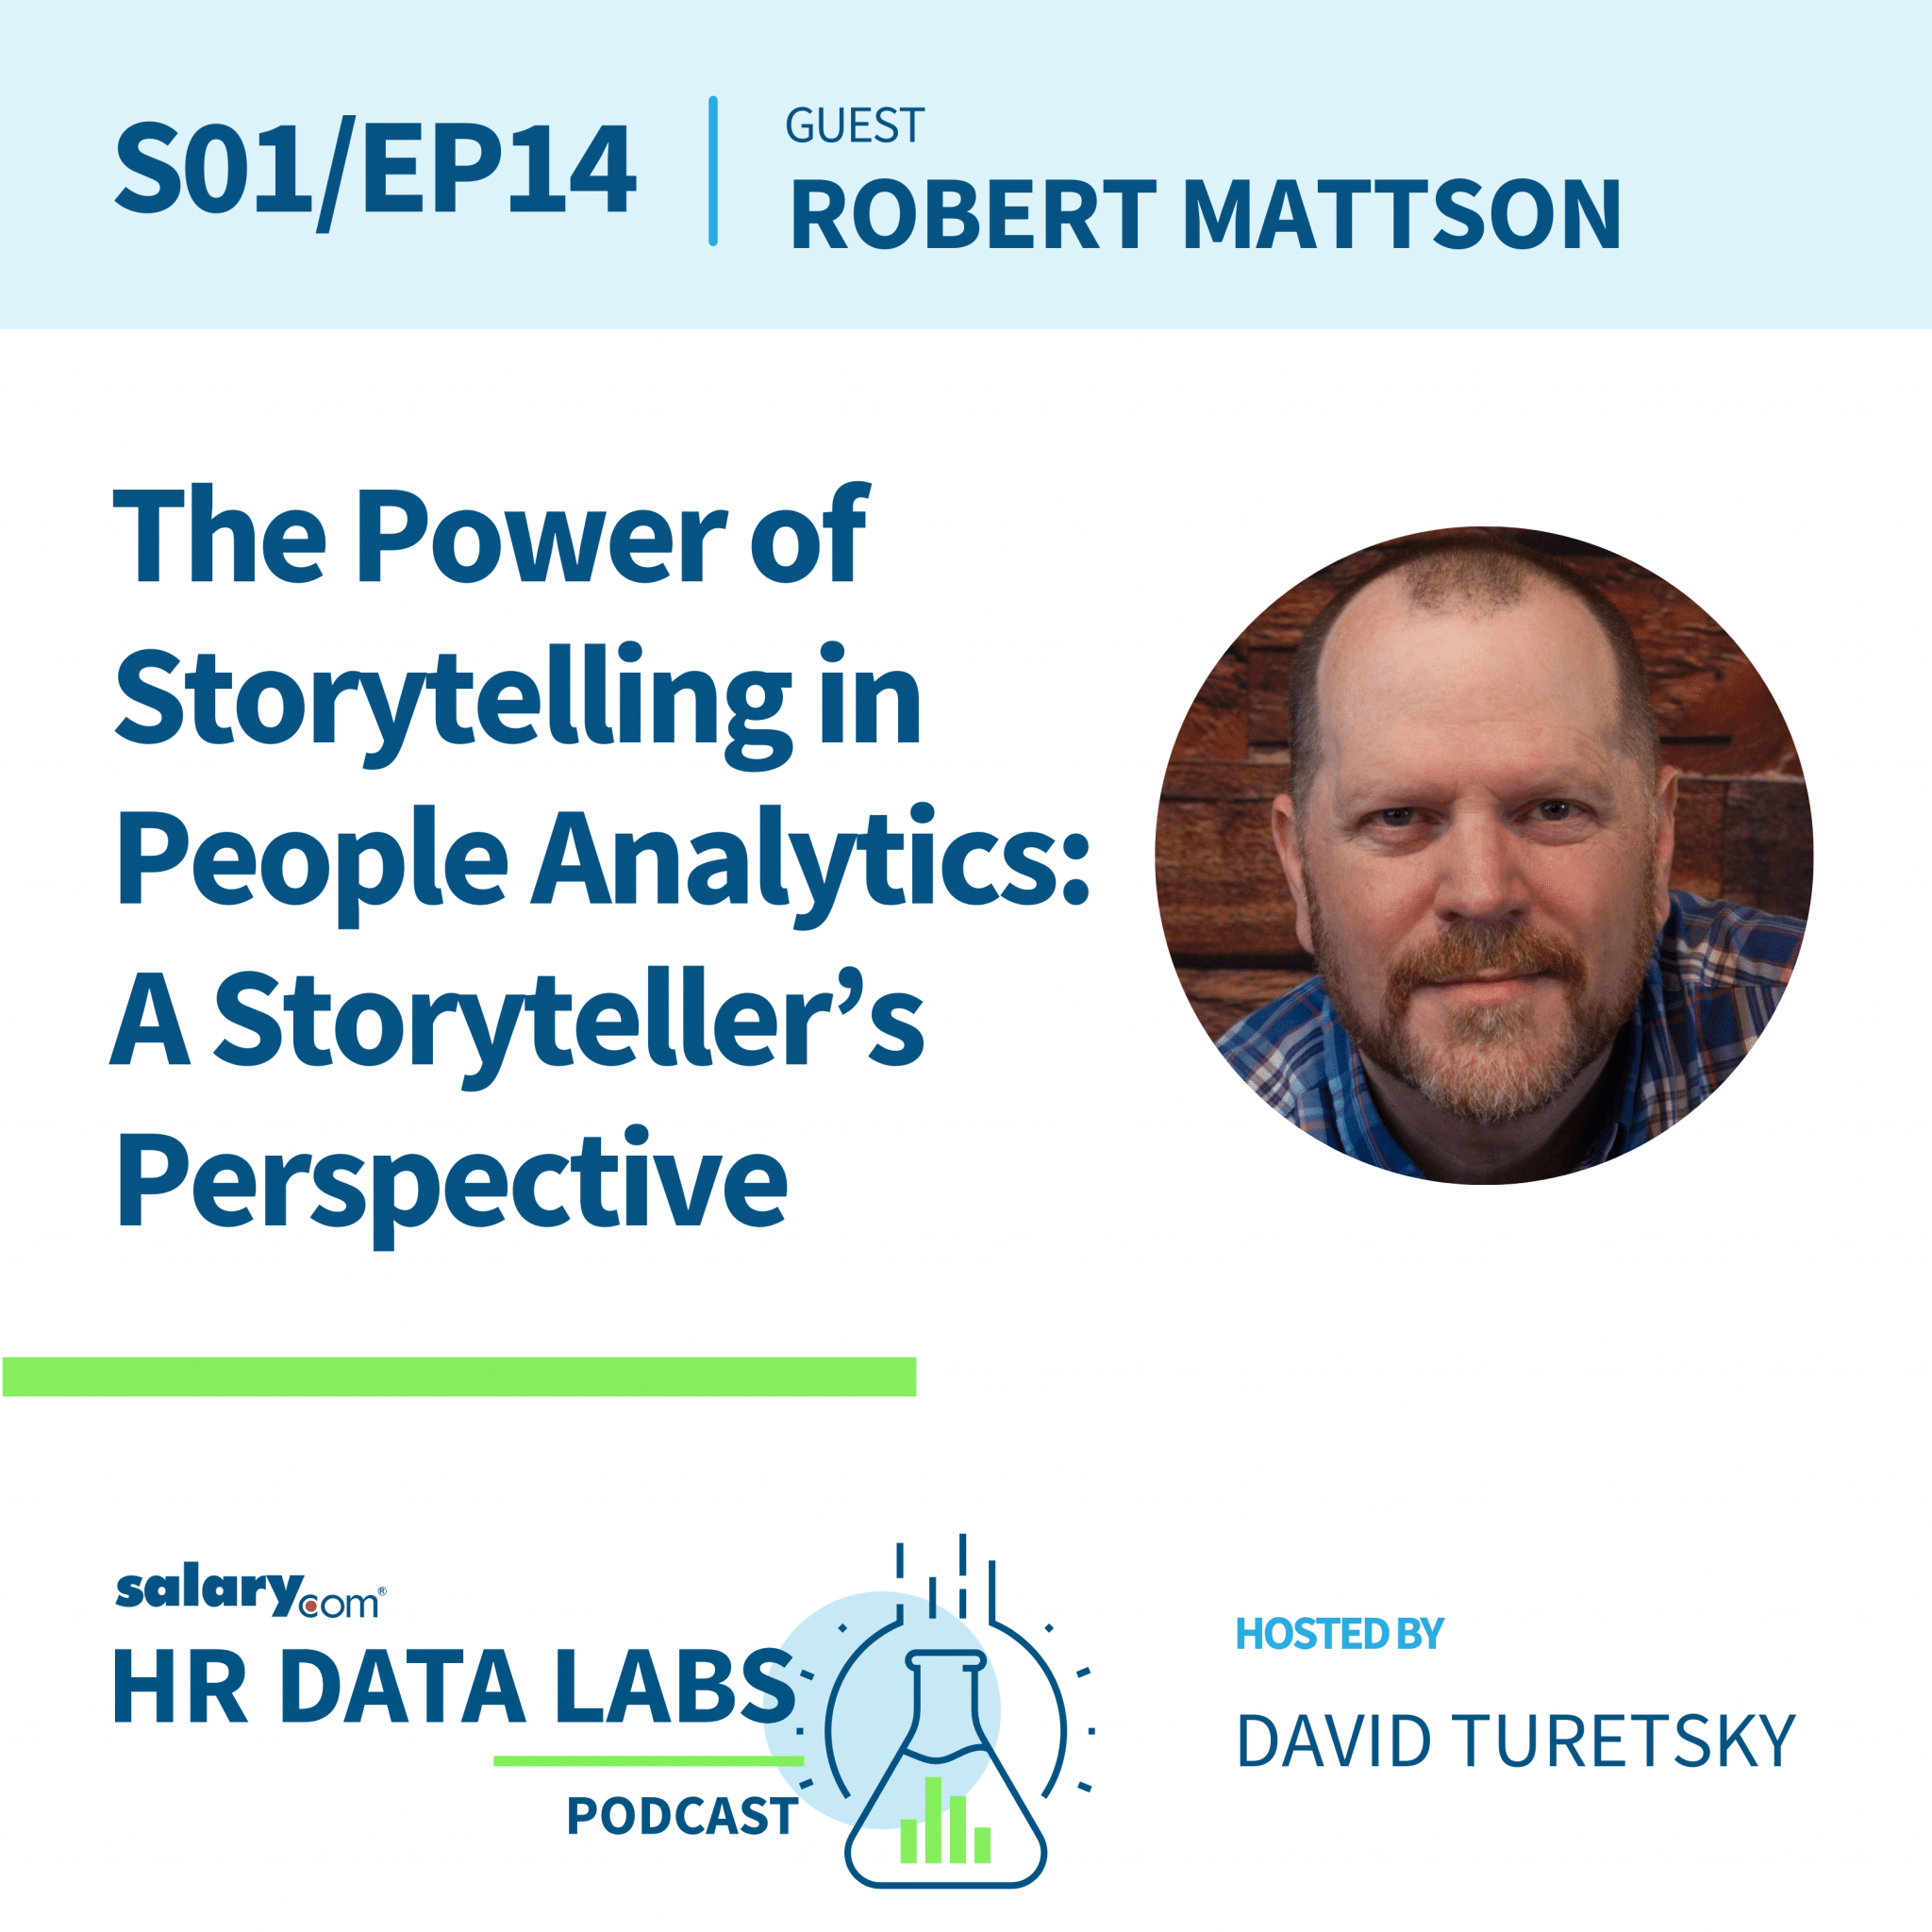 The Power of Storytelling in People Analytics: A Storyteller’s Perspective